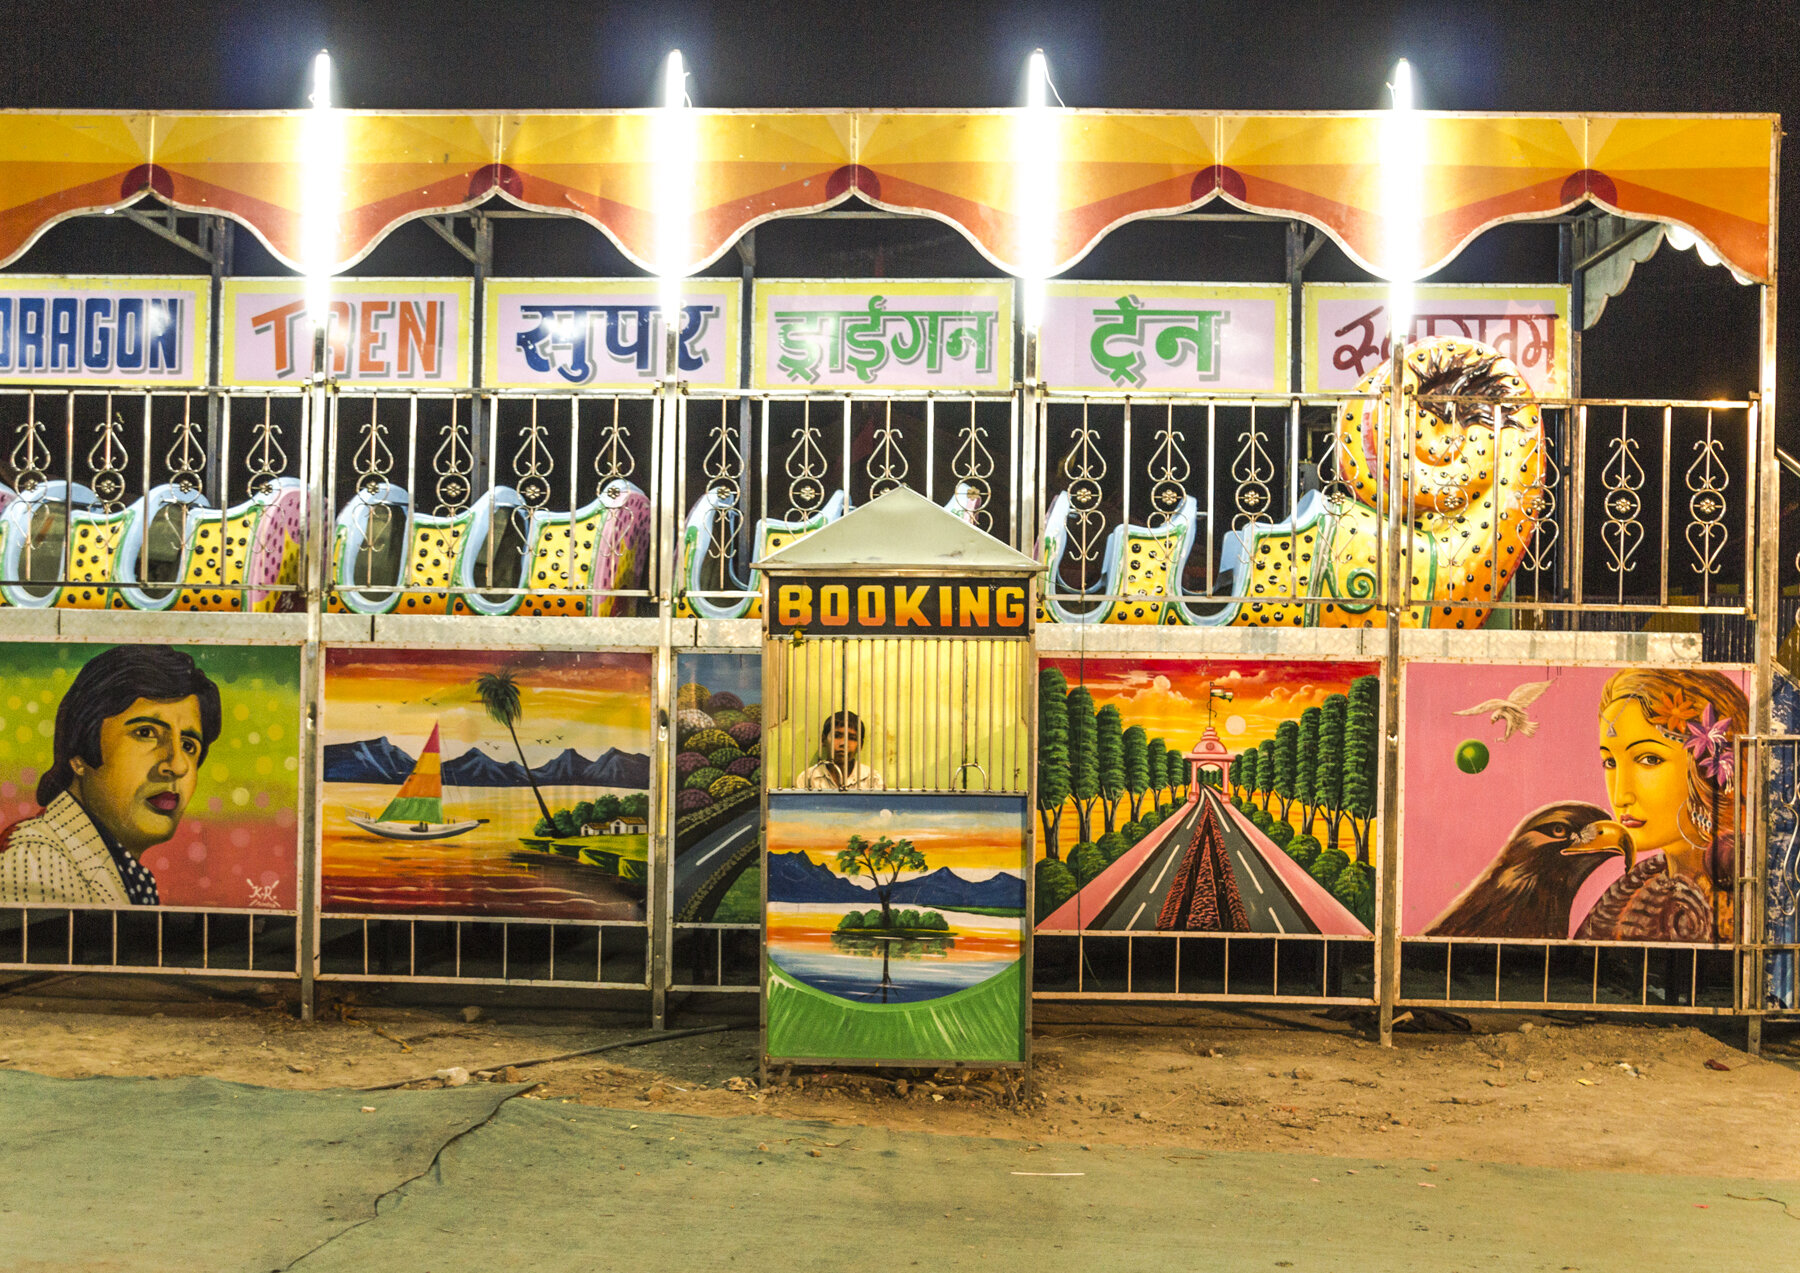 8. Booking Window for a Roller Coaster | From the series Manoranjan Nagri | 2015 | IMG_5168.jpg